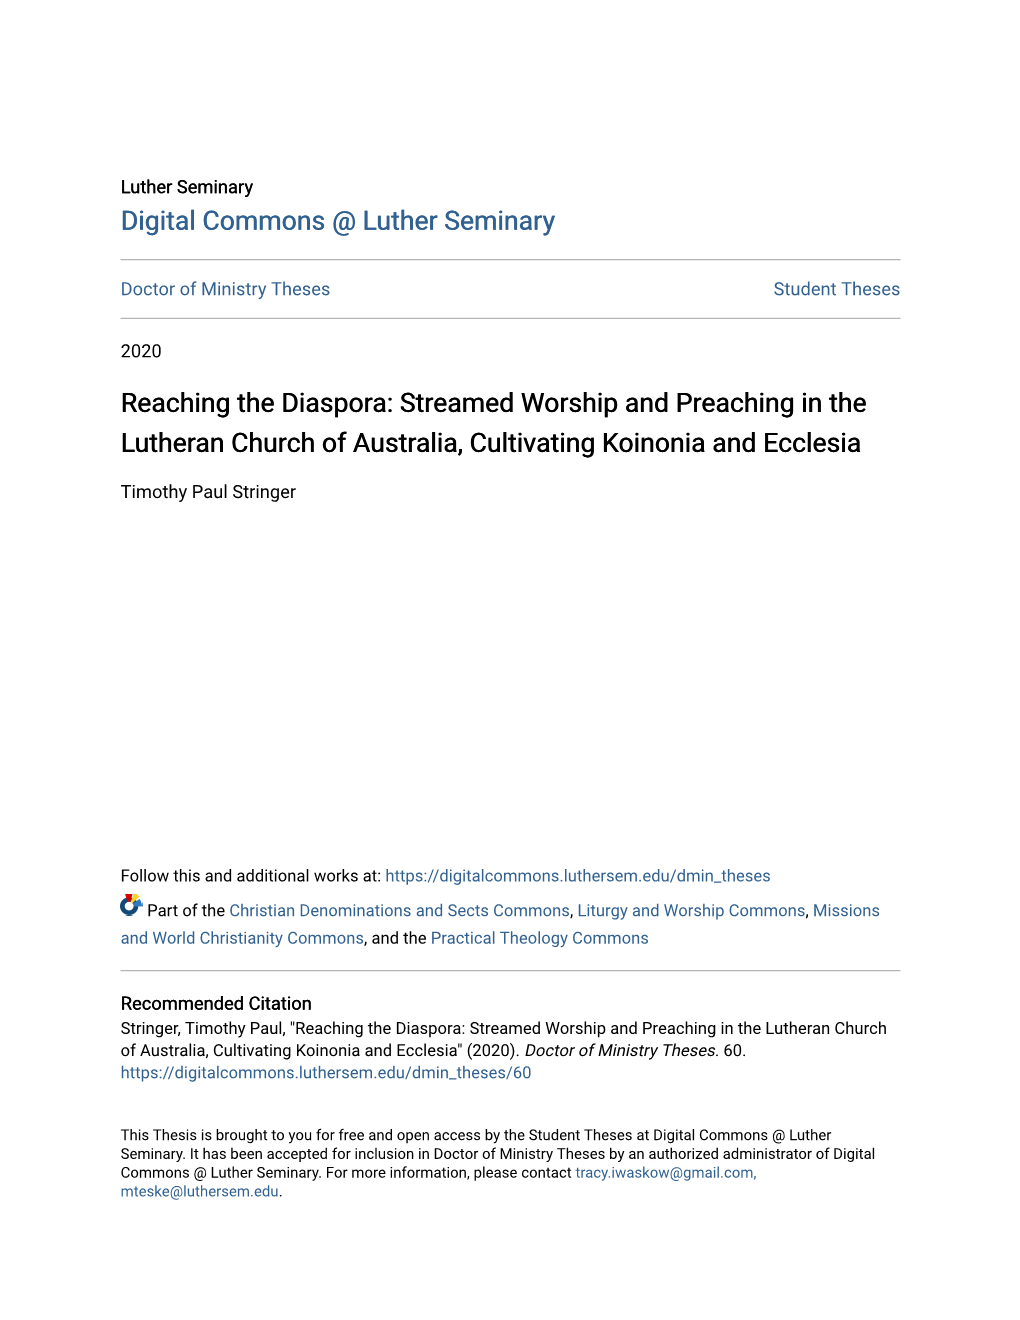 Reaching the Diaspora: Streamed Worship and Preaching in the Lutheran Church of Australia, Cultivating Koinonia and Ecclesia